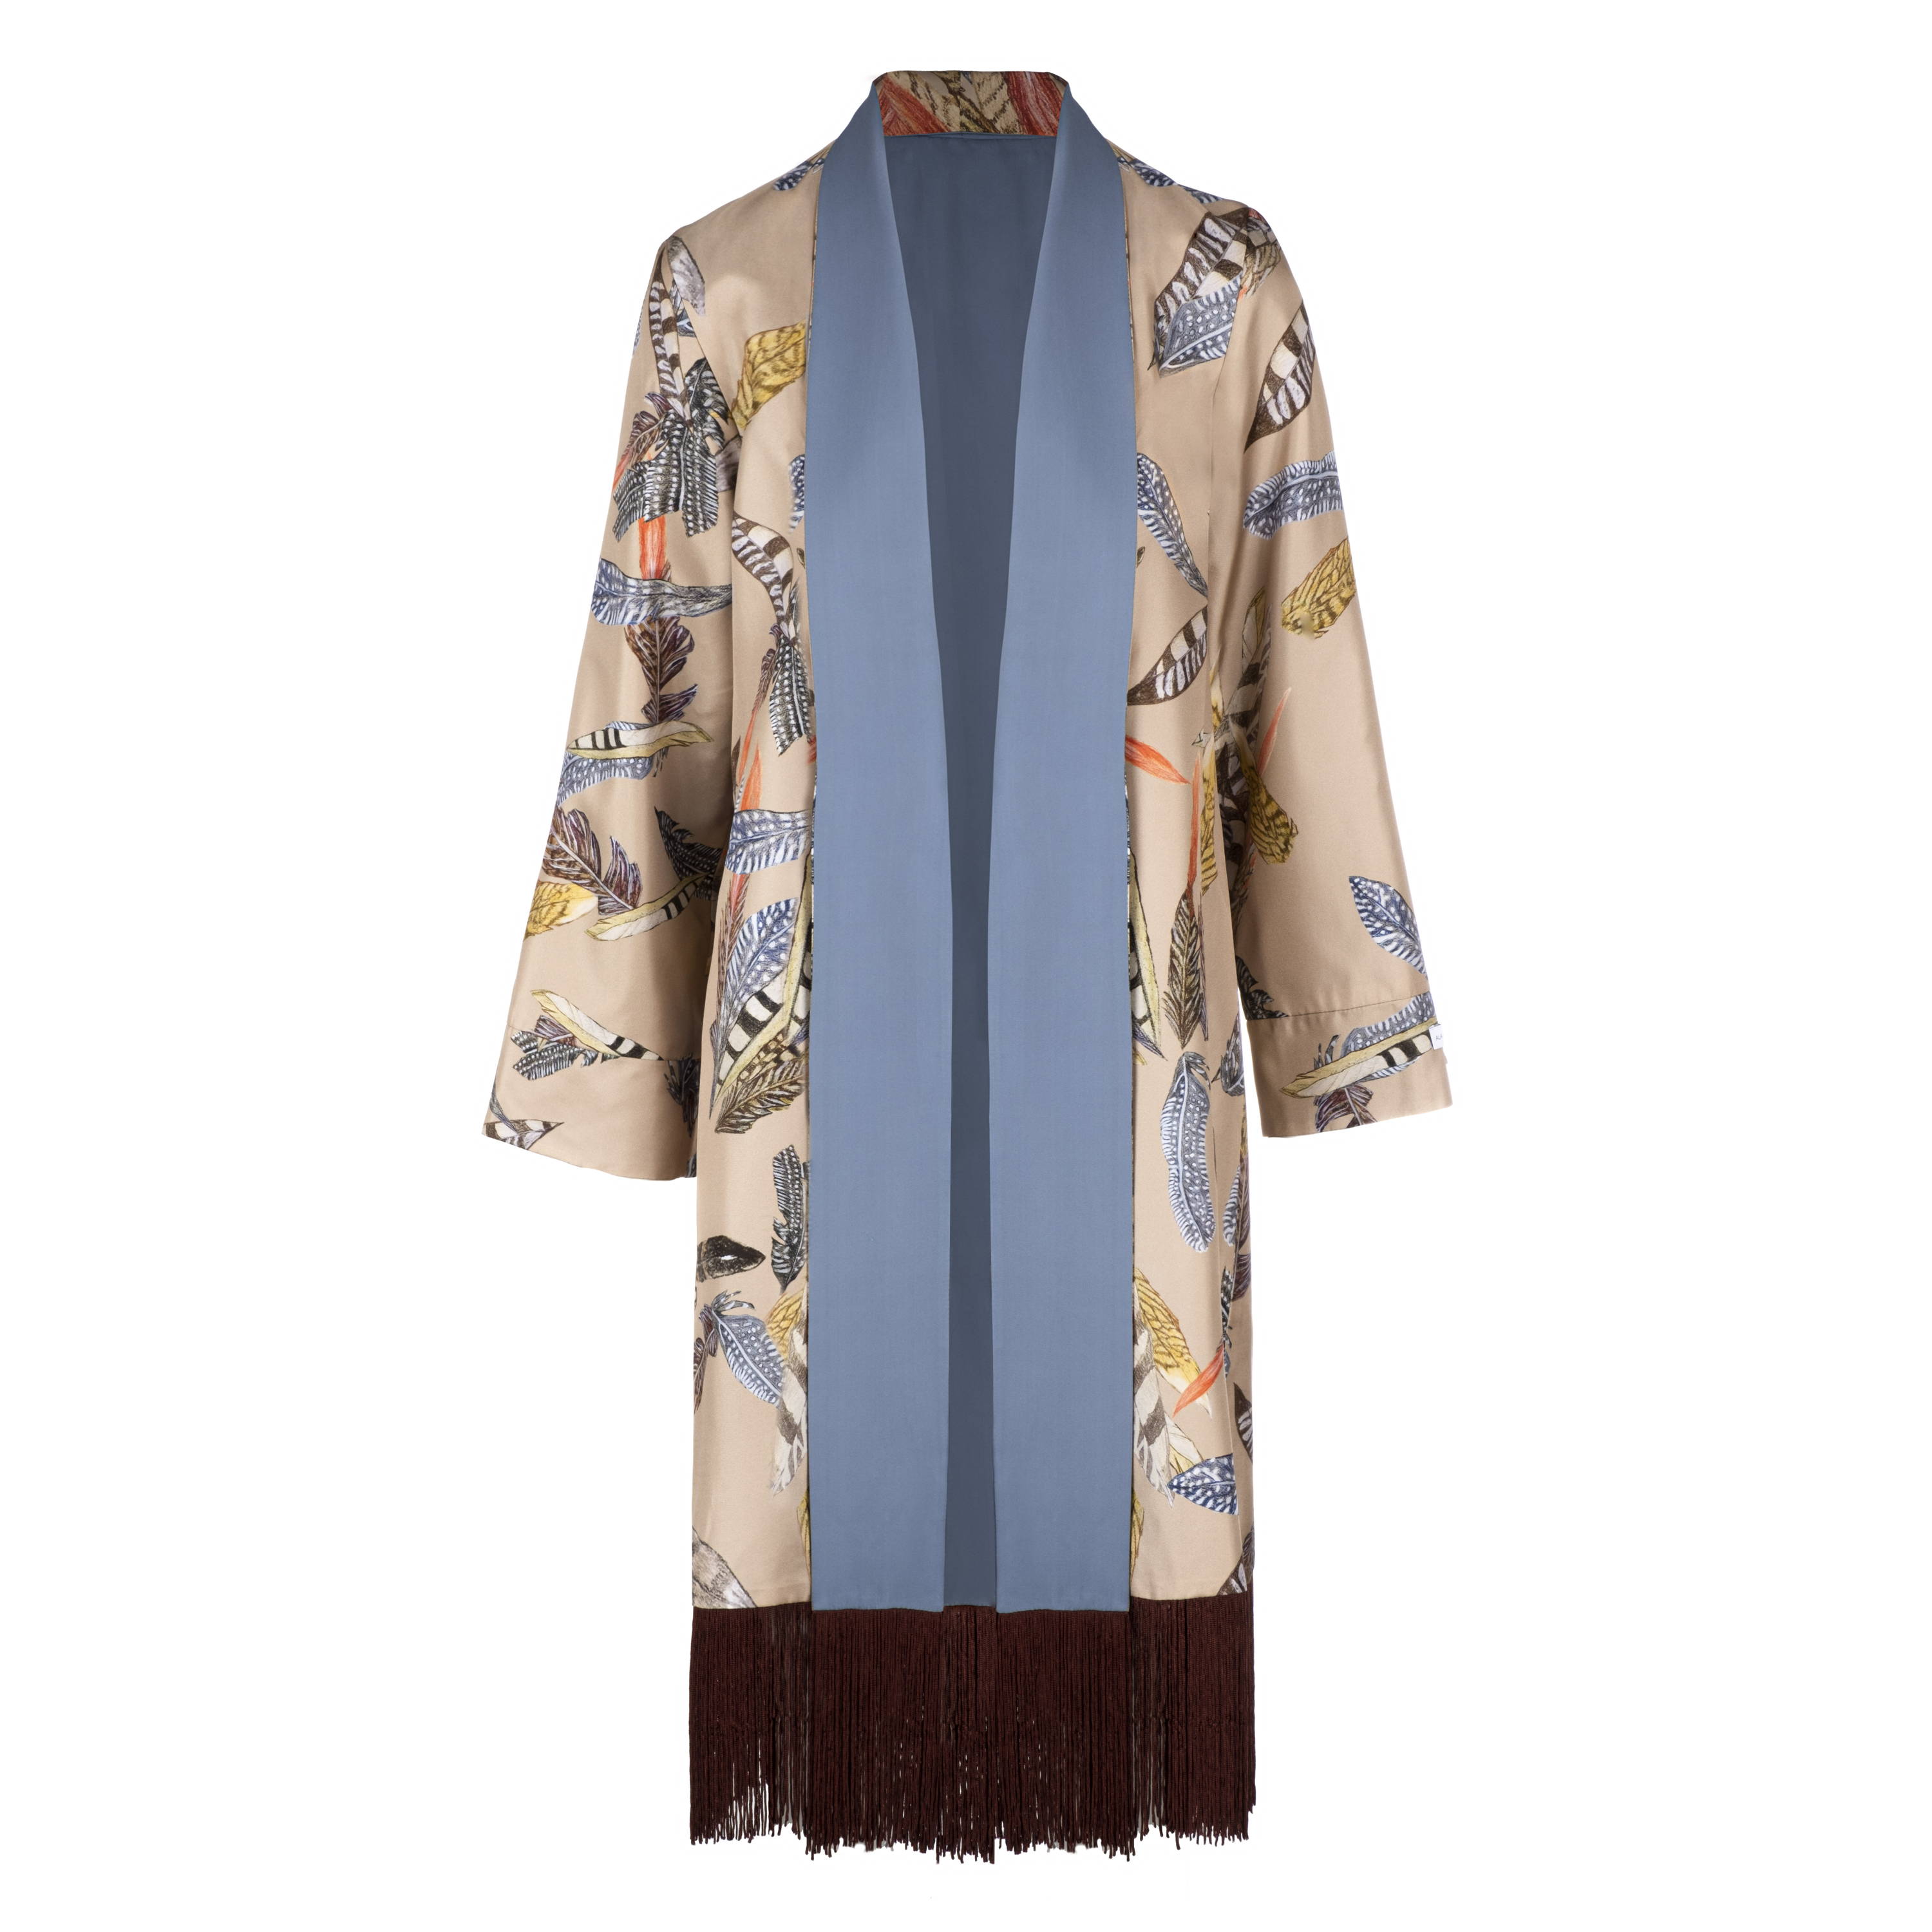 Flat image of. a feather printed silk jacket by Ala von Auersperg